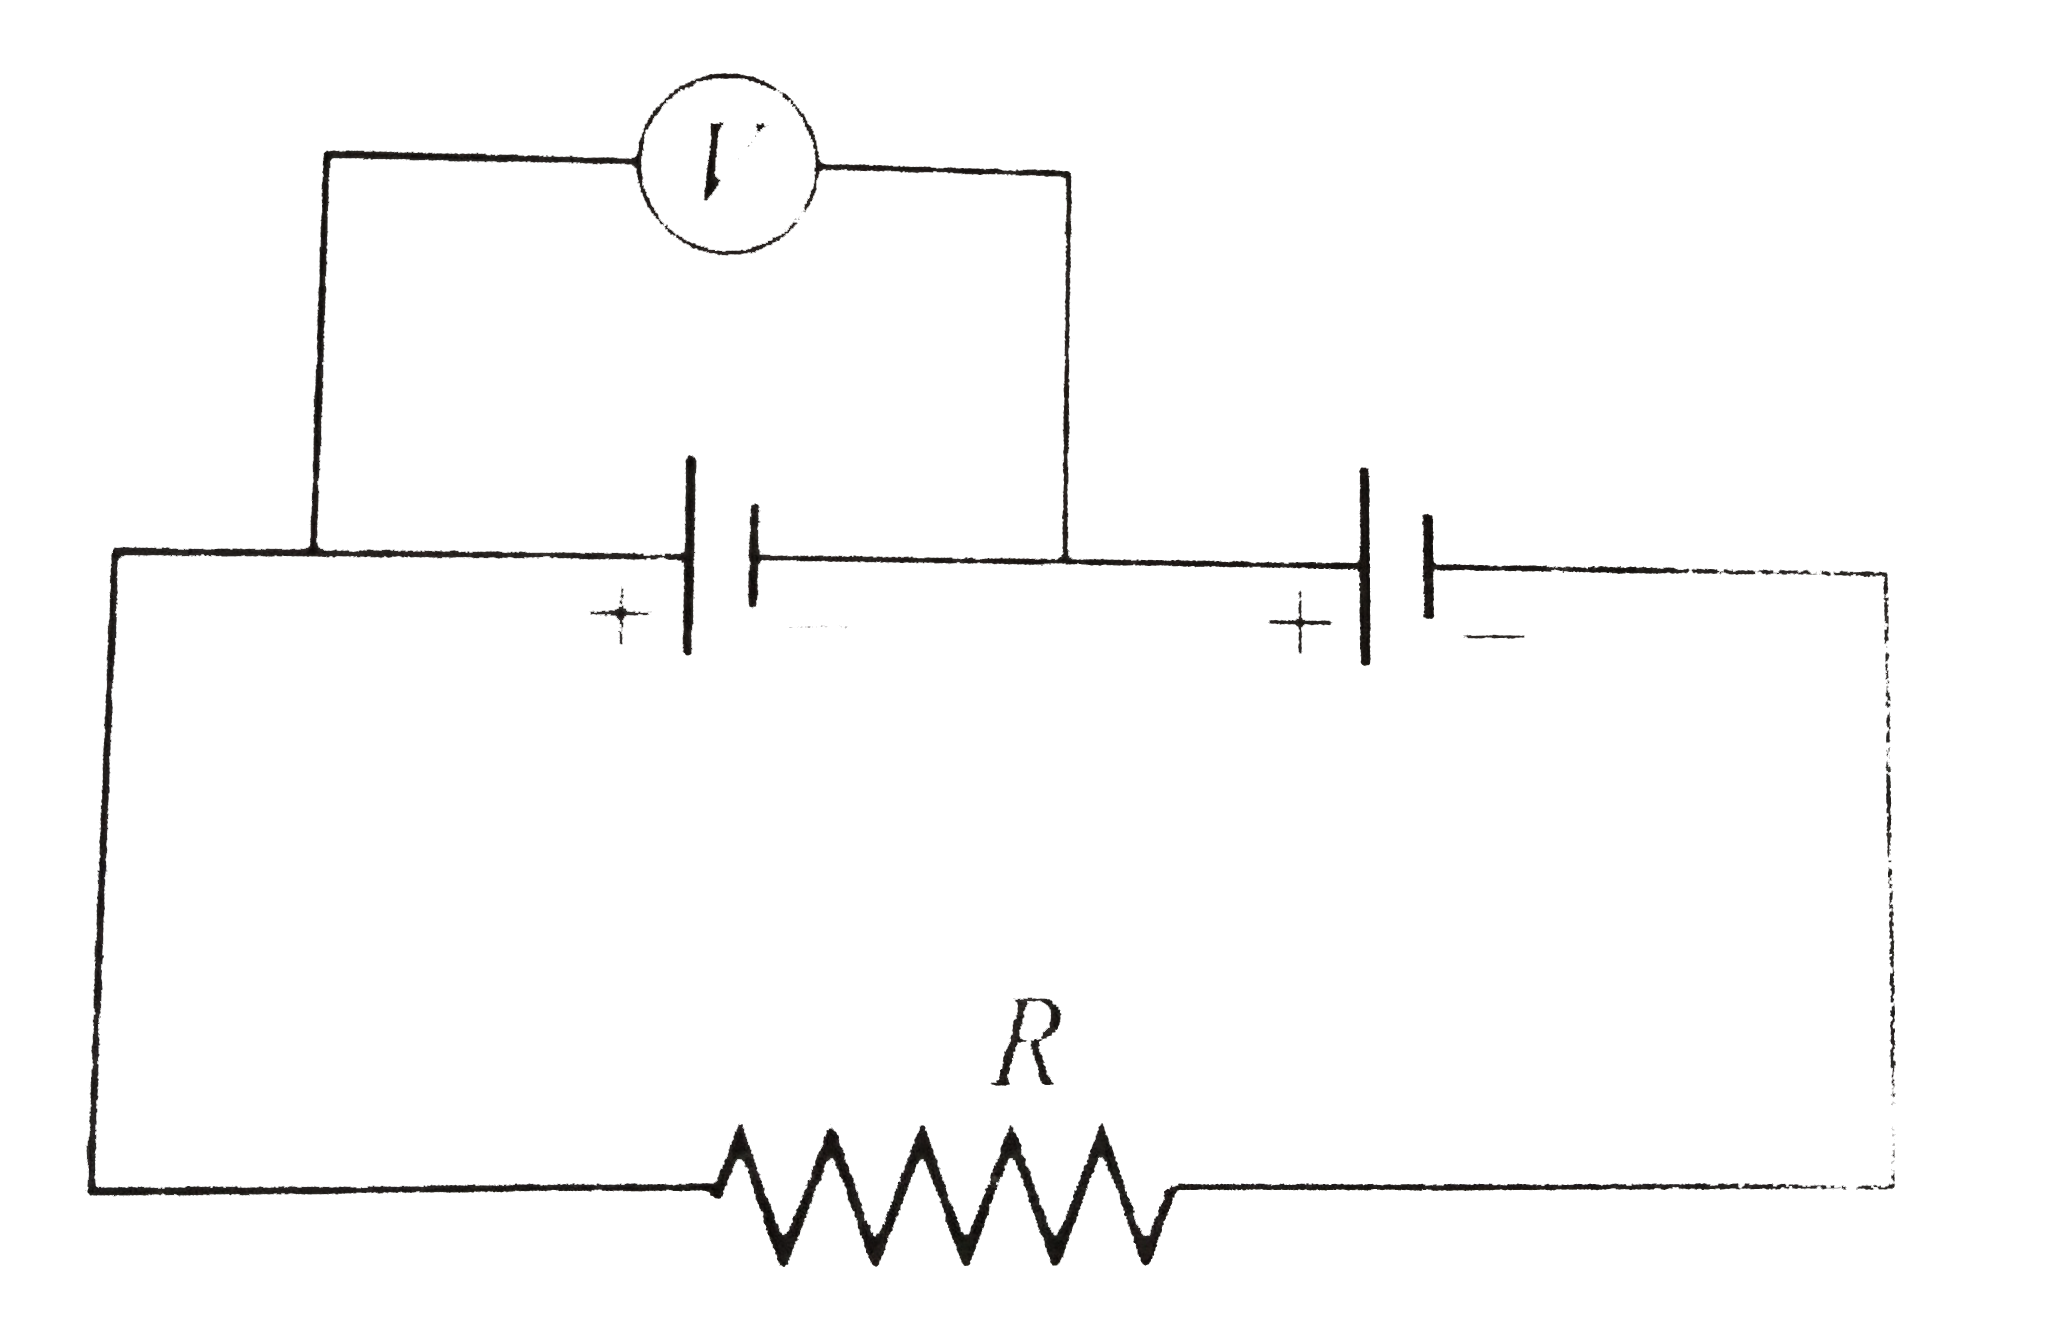 In Fig. two cells have equal emf E but internal resistances  are r1 and r2. If the reading of the voltmeter is zero, then relation between R, r1 and r2 is